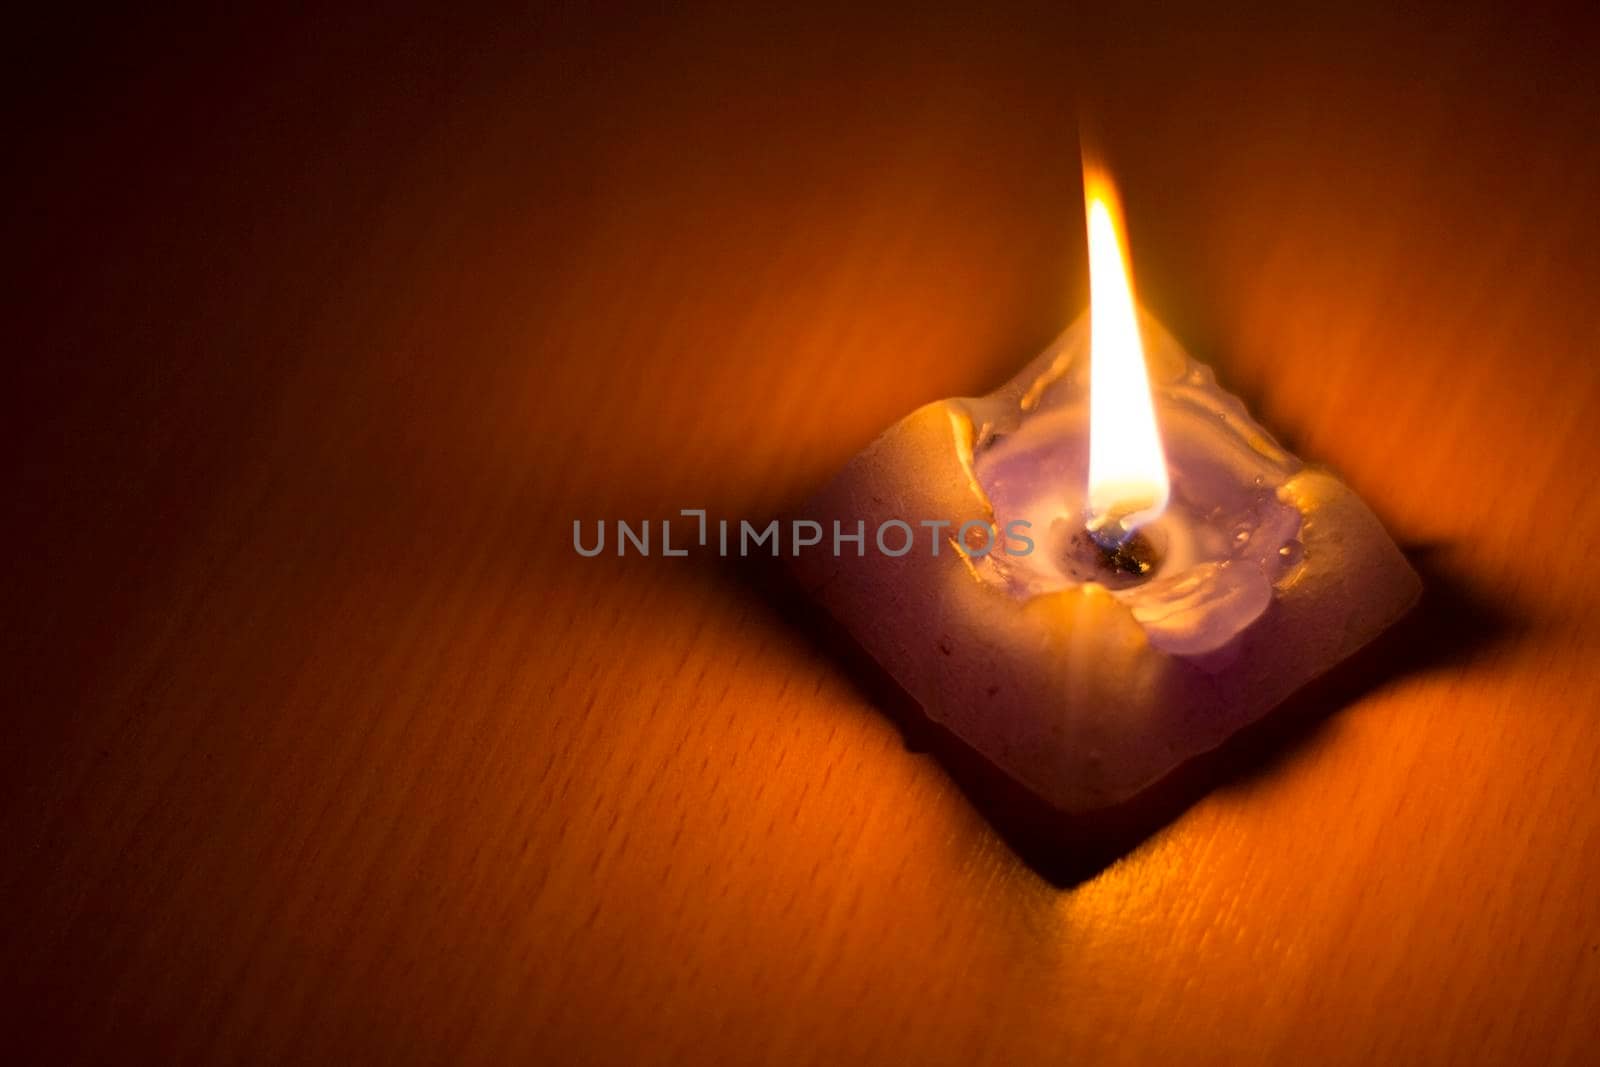 Abstract background with a consumed wax candle burning over a wood background